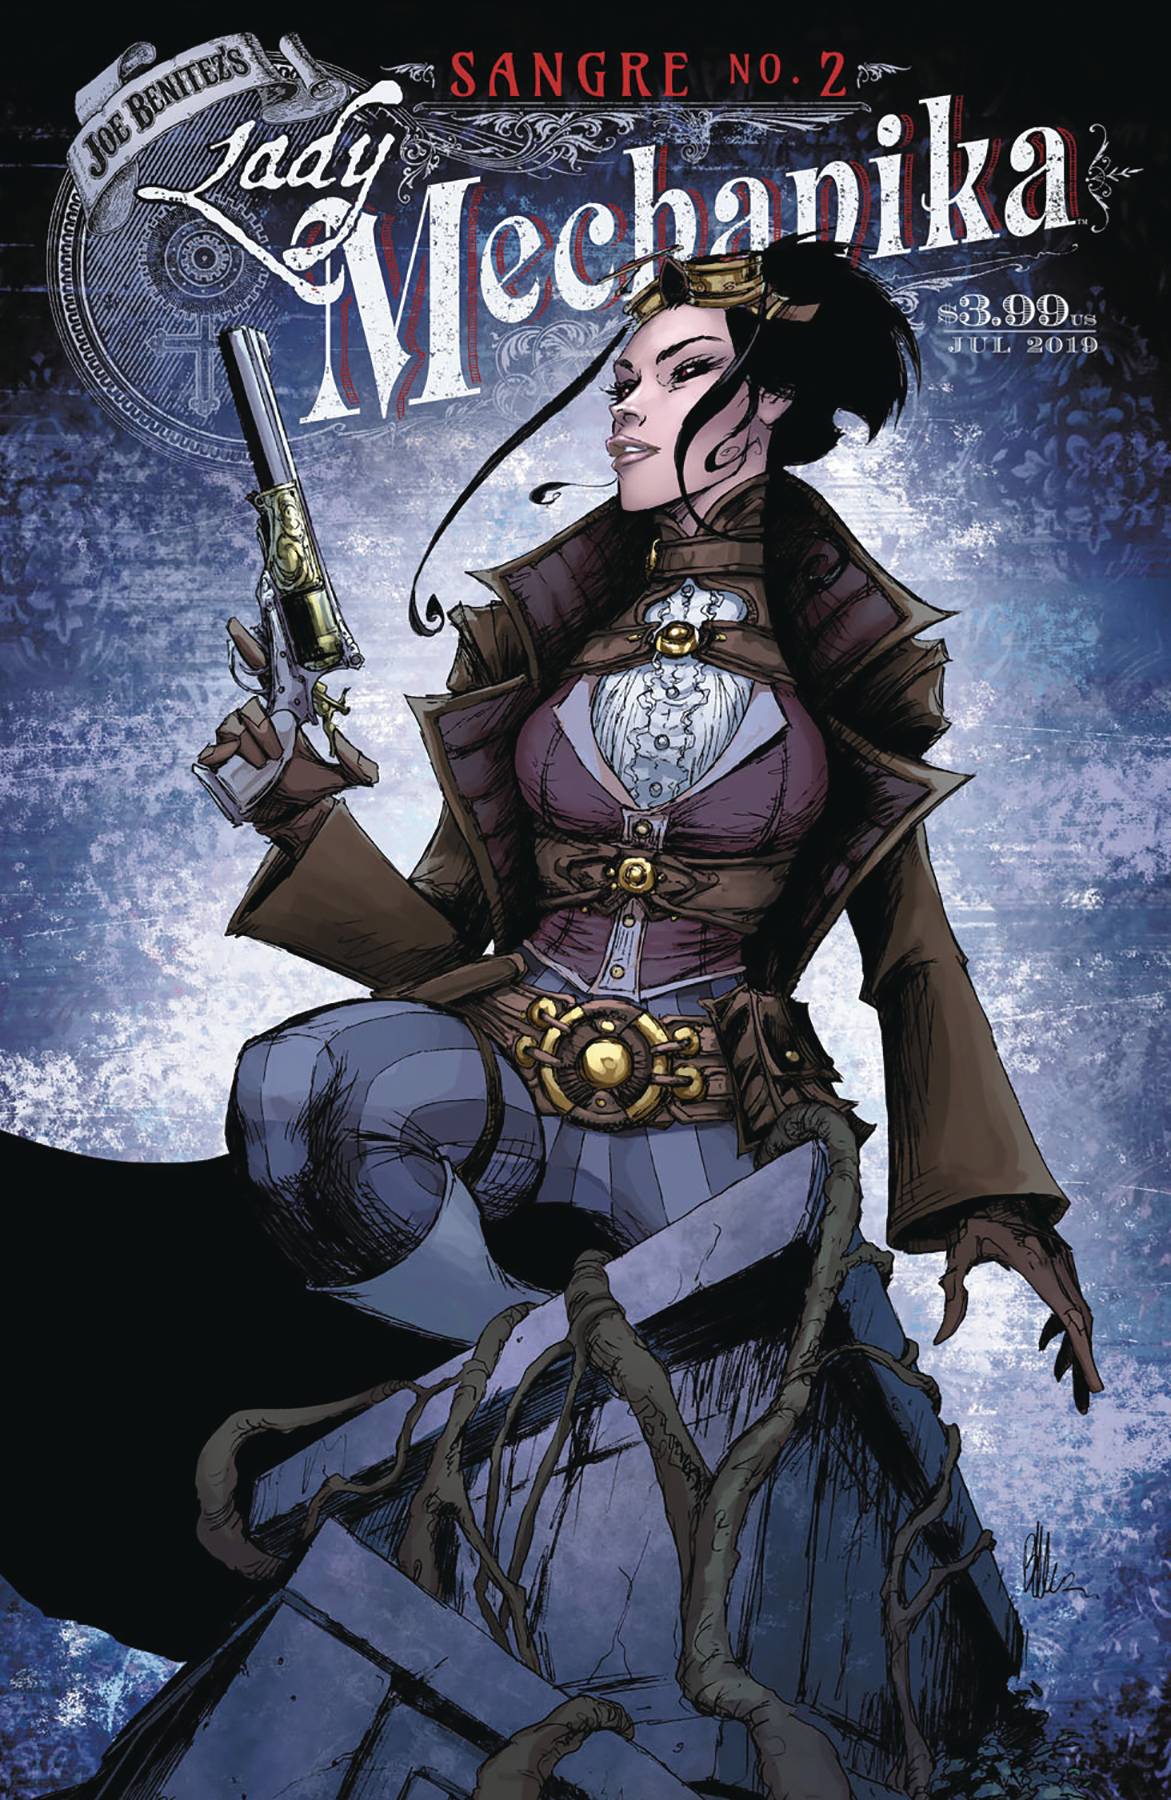 Photo of Lady Mechanika Sangre Issue 2 (of 5) Main Var CVRs - NM comic sold by Stronghold Collectibles